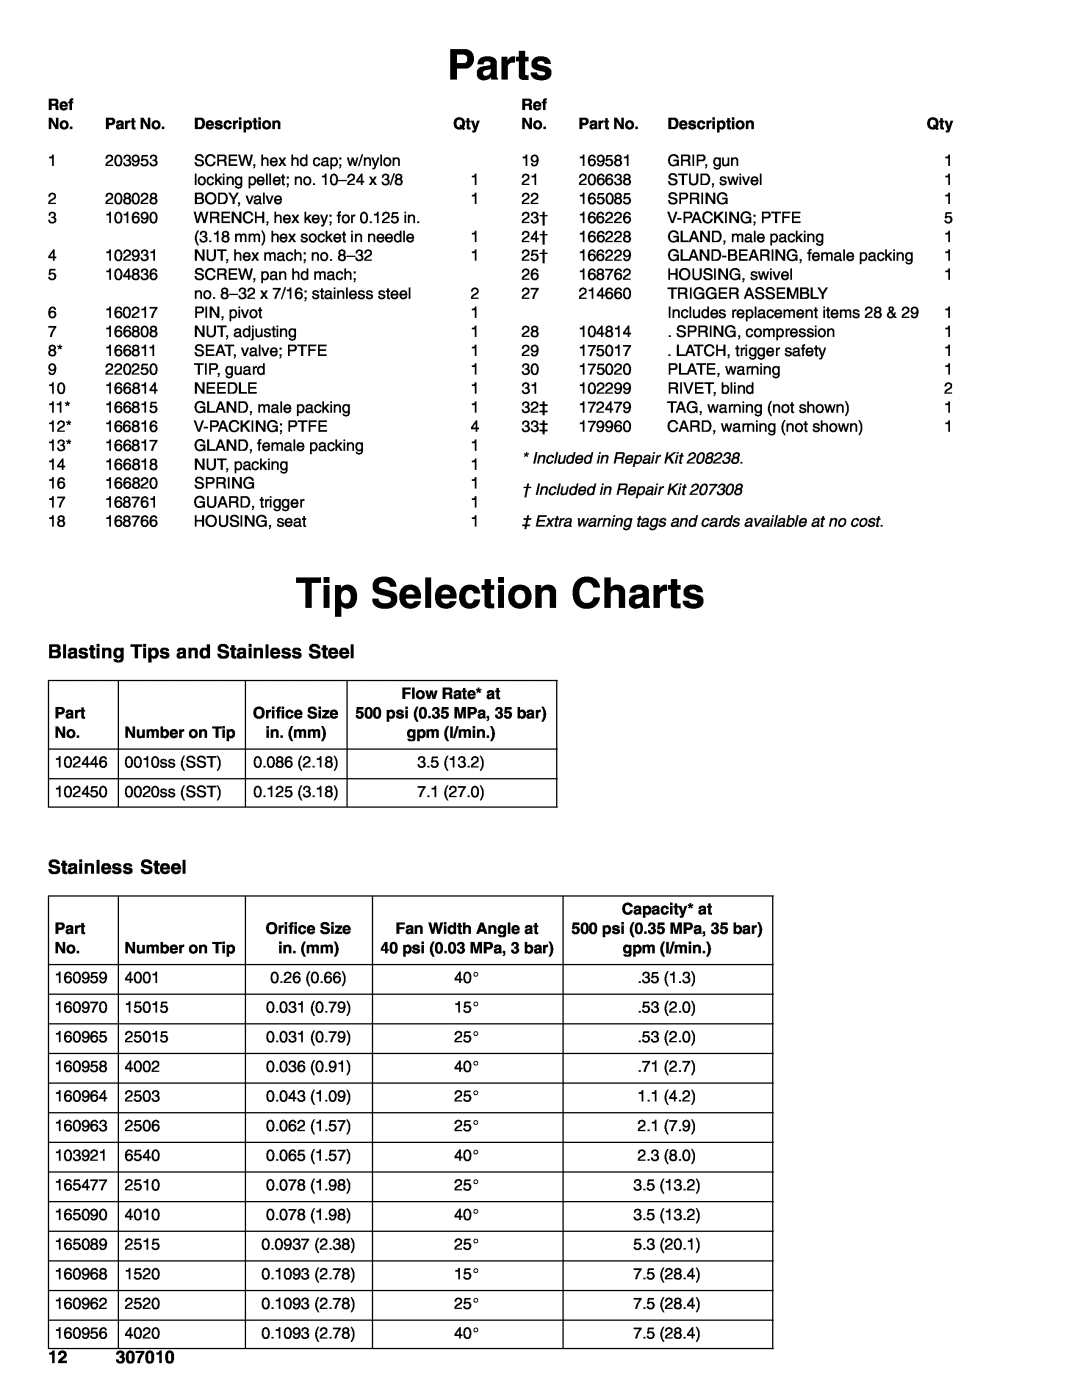 Graco Inc 307010L, 208008 Tip Selection Charts, Blasting Tips and Stainless Steel, Parts, Included in Repair Kit 